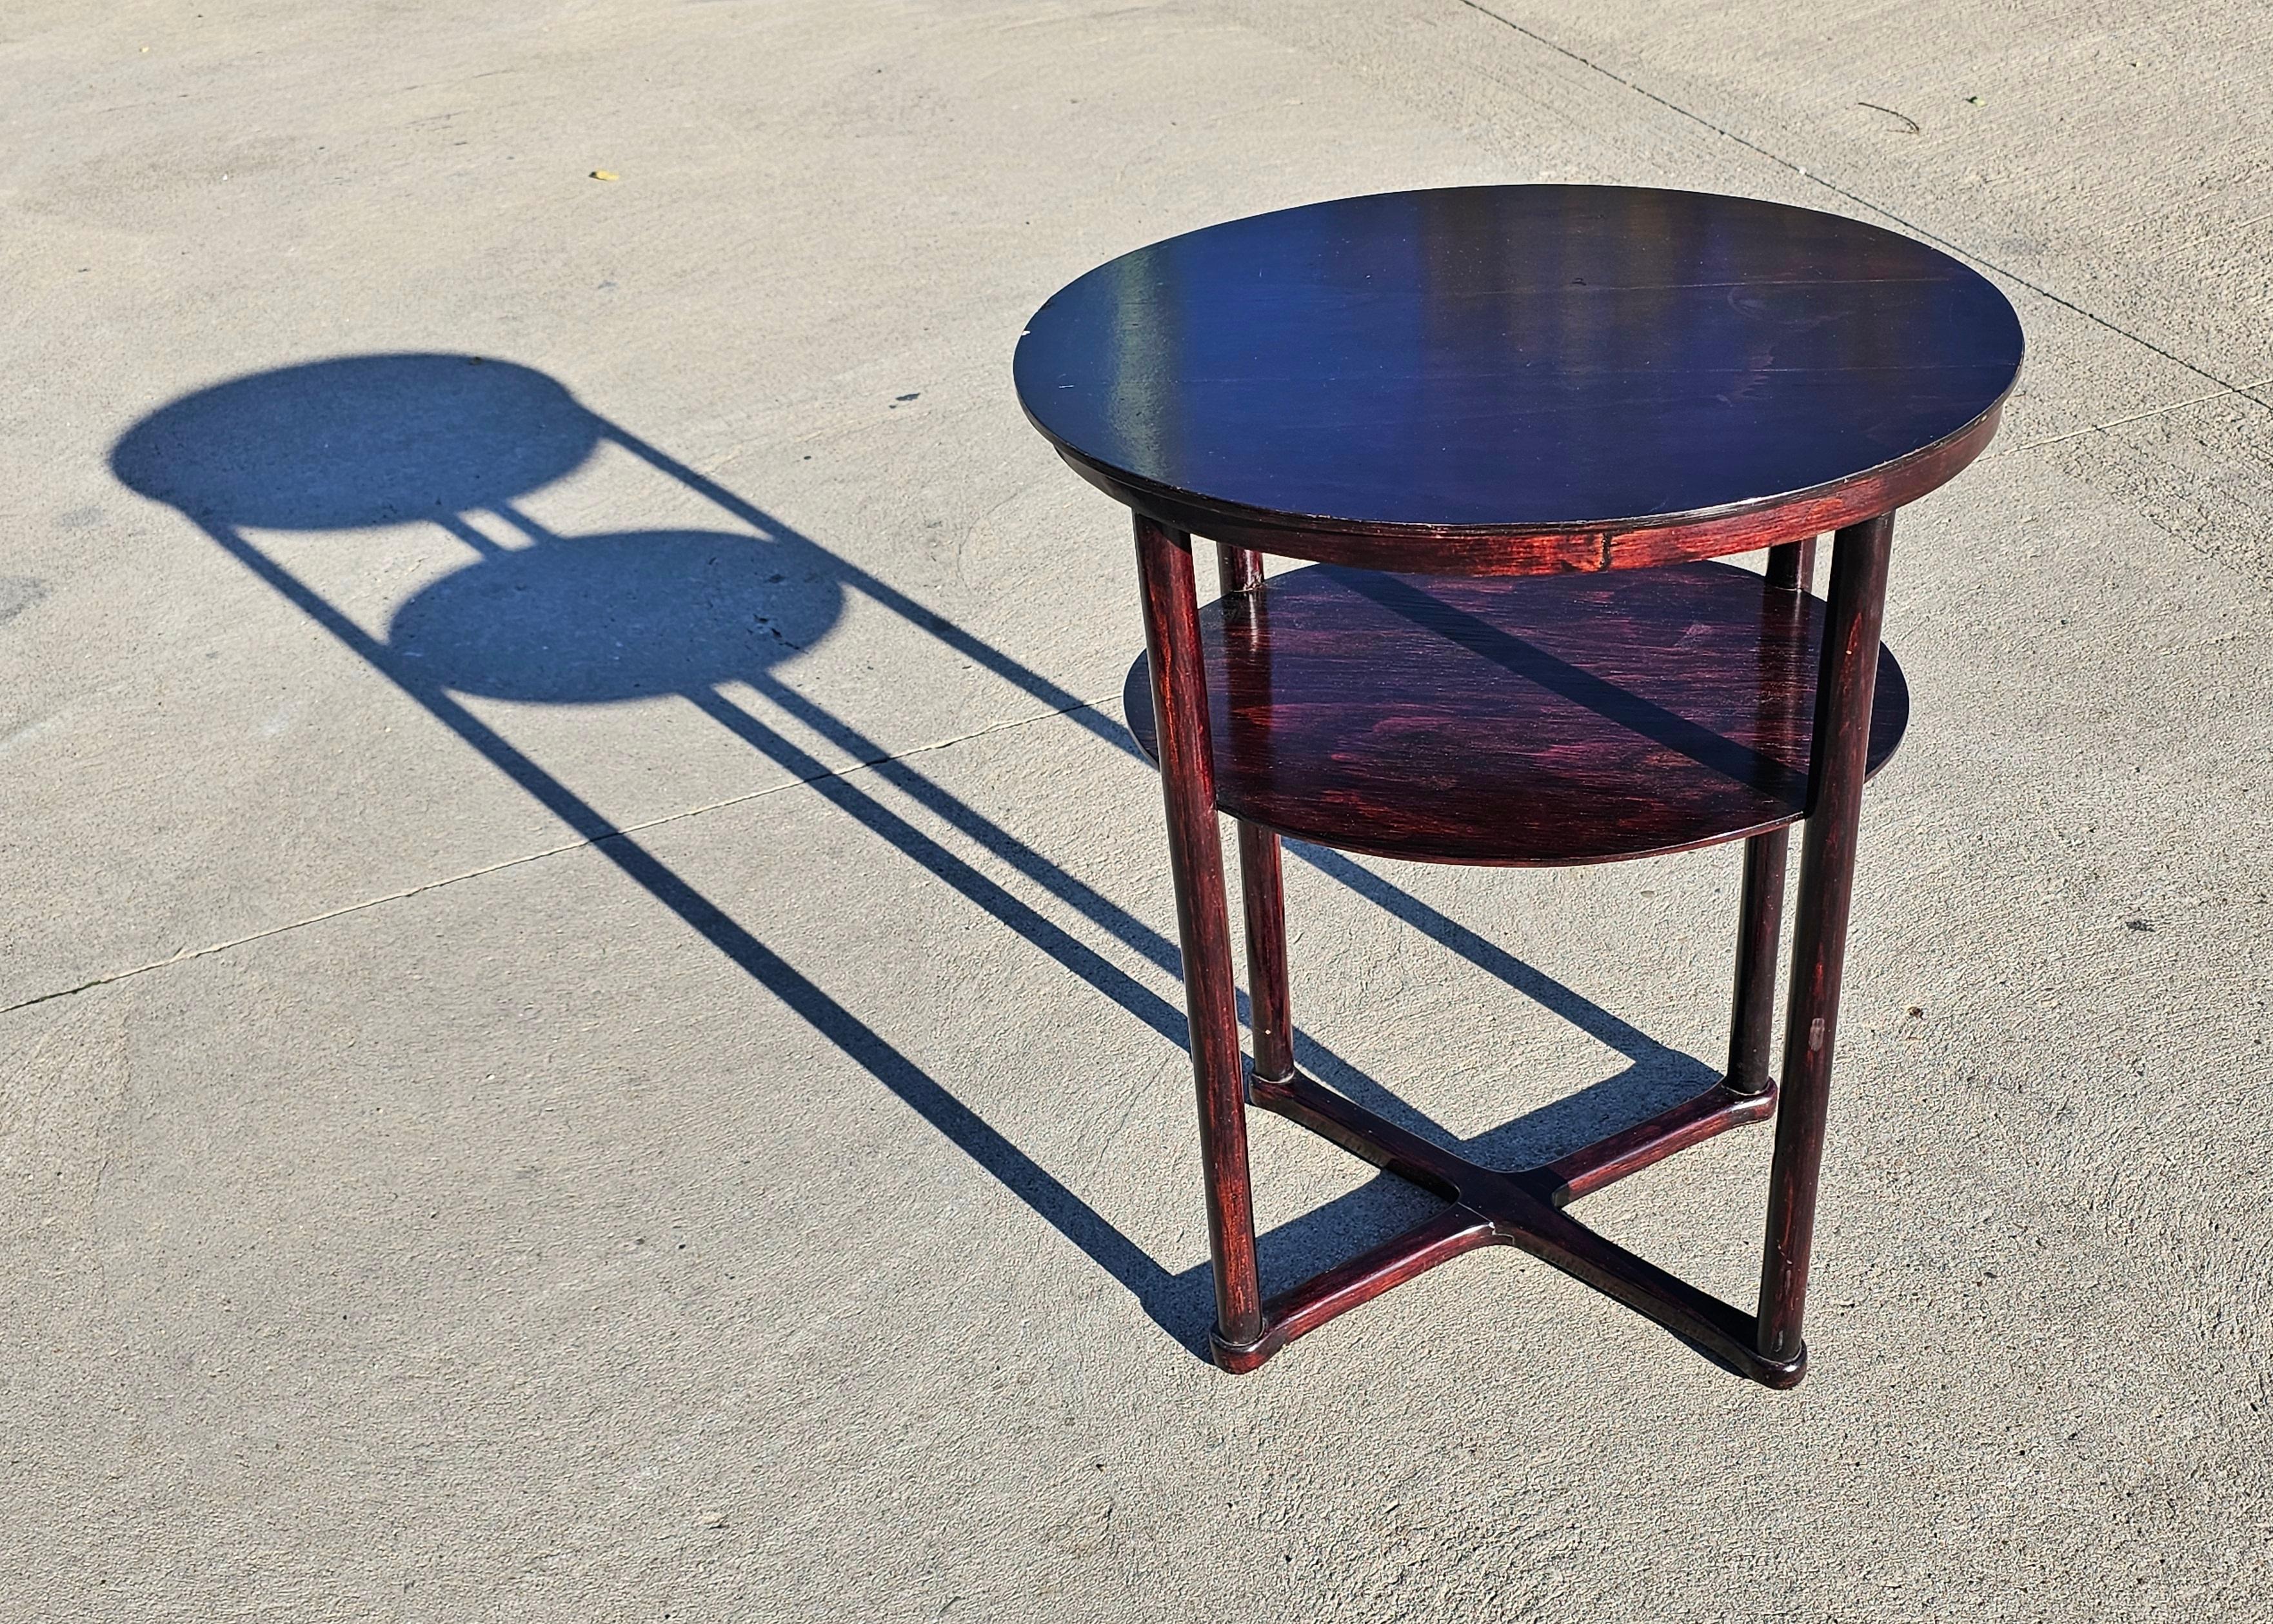 Vienna Secession Oval Side Table Model 960/2 designed by Josef Hoffmann, 1910s For Sale 3